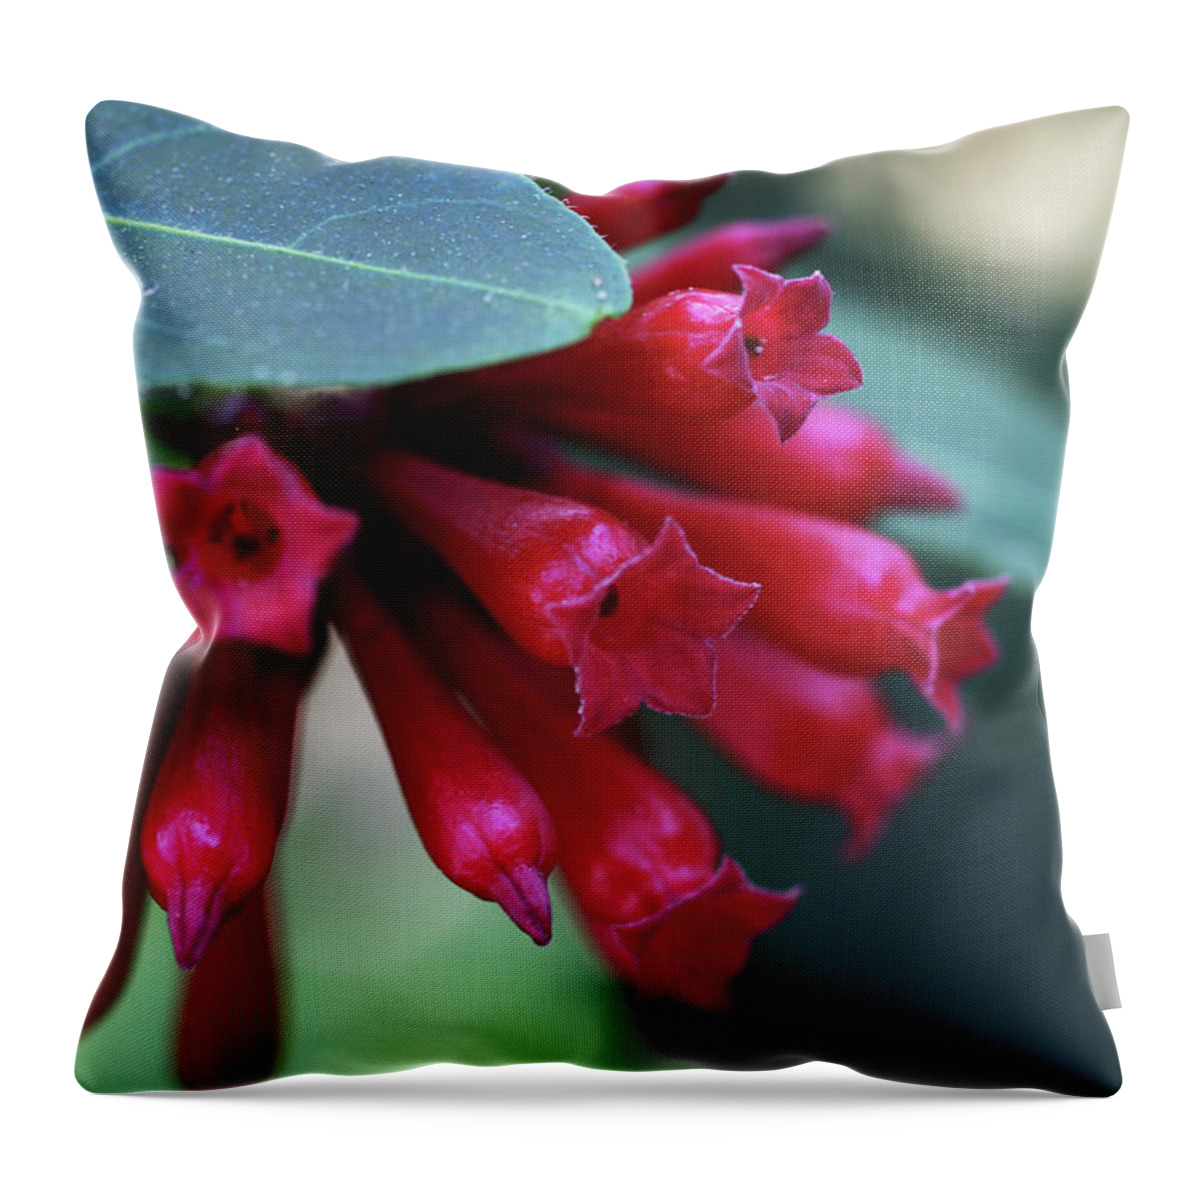 Jasmine Purple Flower Close-up Throw Pillow featuring the photograph Day Blooming Jasime by Christina Geiger